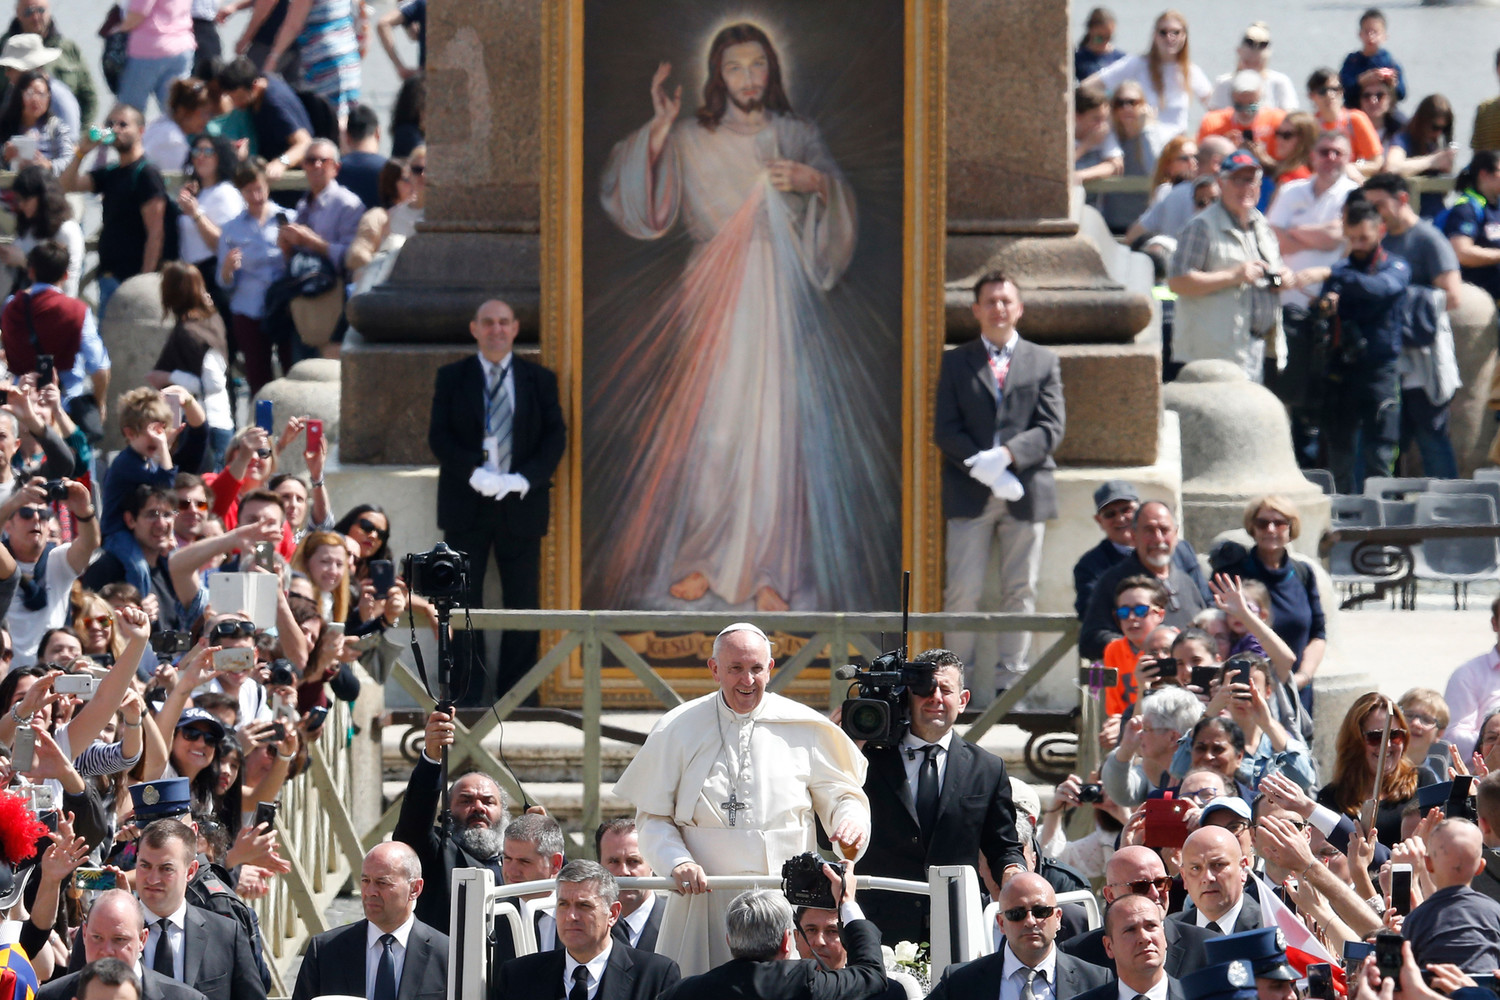 Pope Francis greets the crowd after celebrating Mass marking the feast of Divine Mercy in St. Peter’s Square at the Vatican April 8.